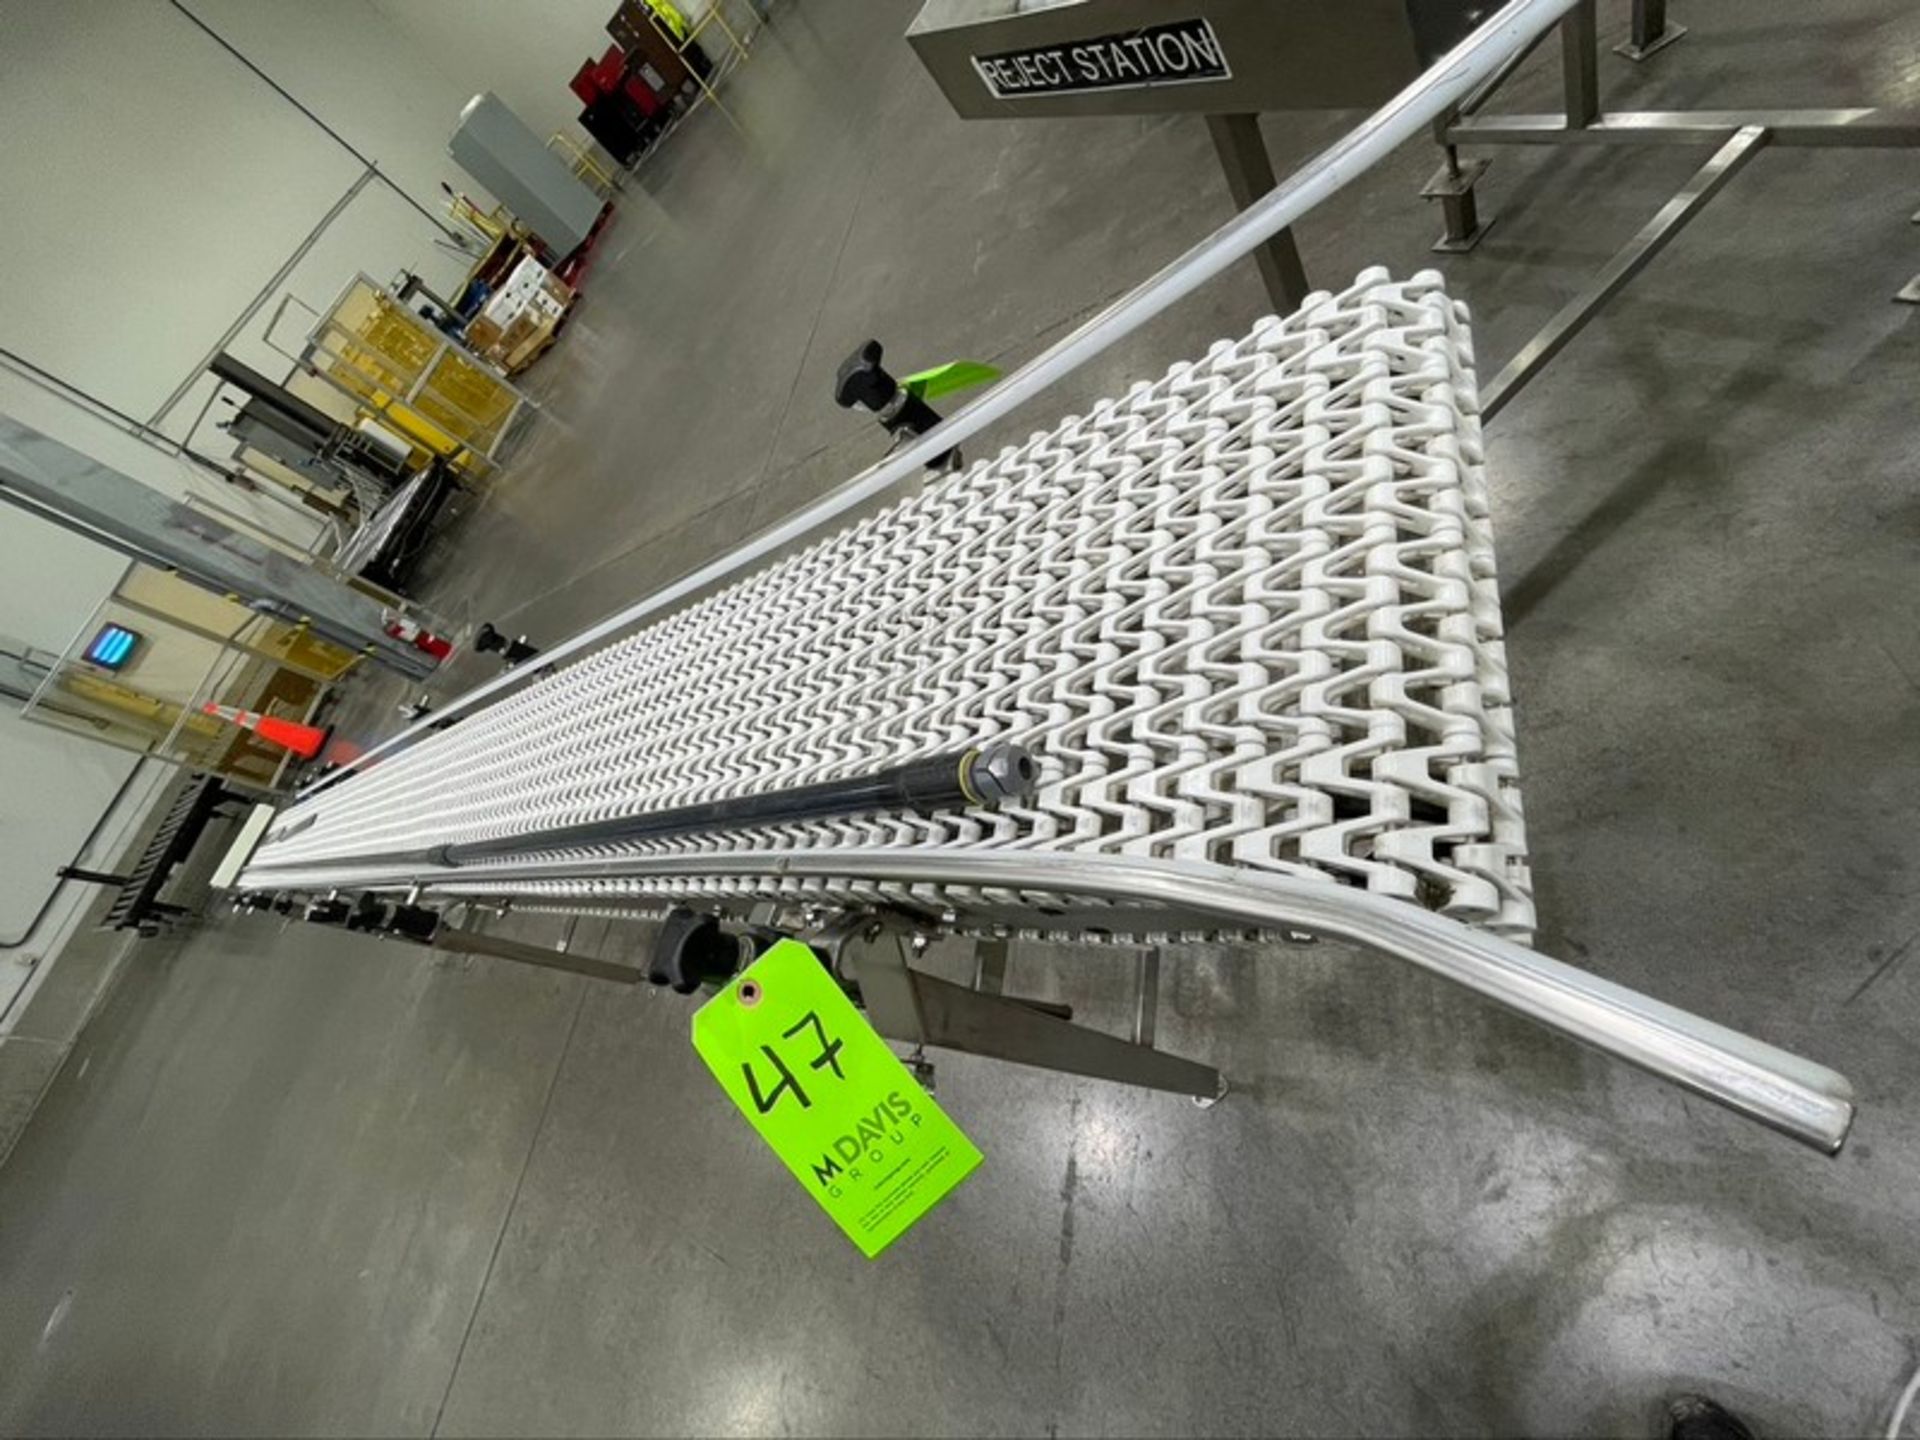 SPANTECH 15'' L X 12" W CASE CONVEYOR, (YOG47)(INV#84331)(Located @ the MDG Auction Showroom 2.0 - Image 6 of 12